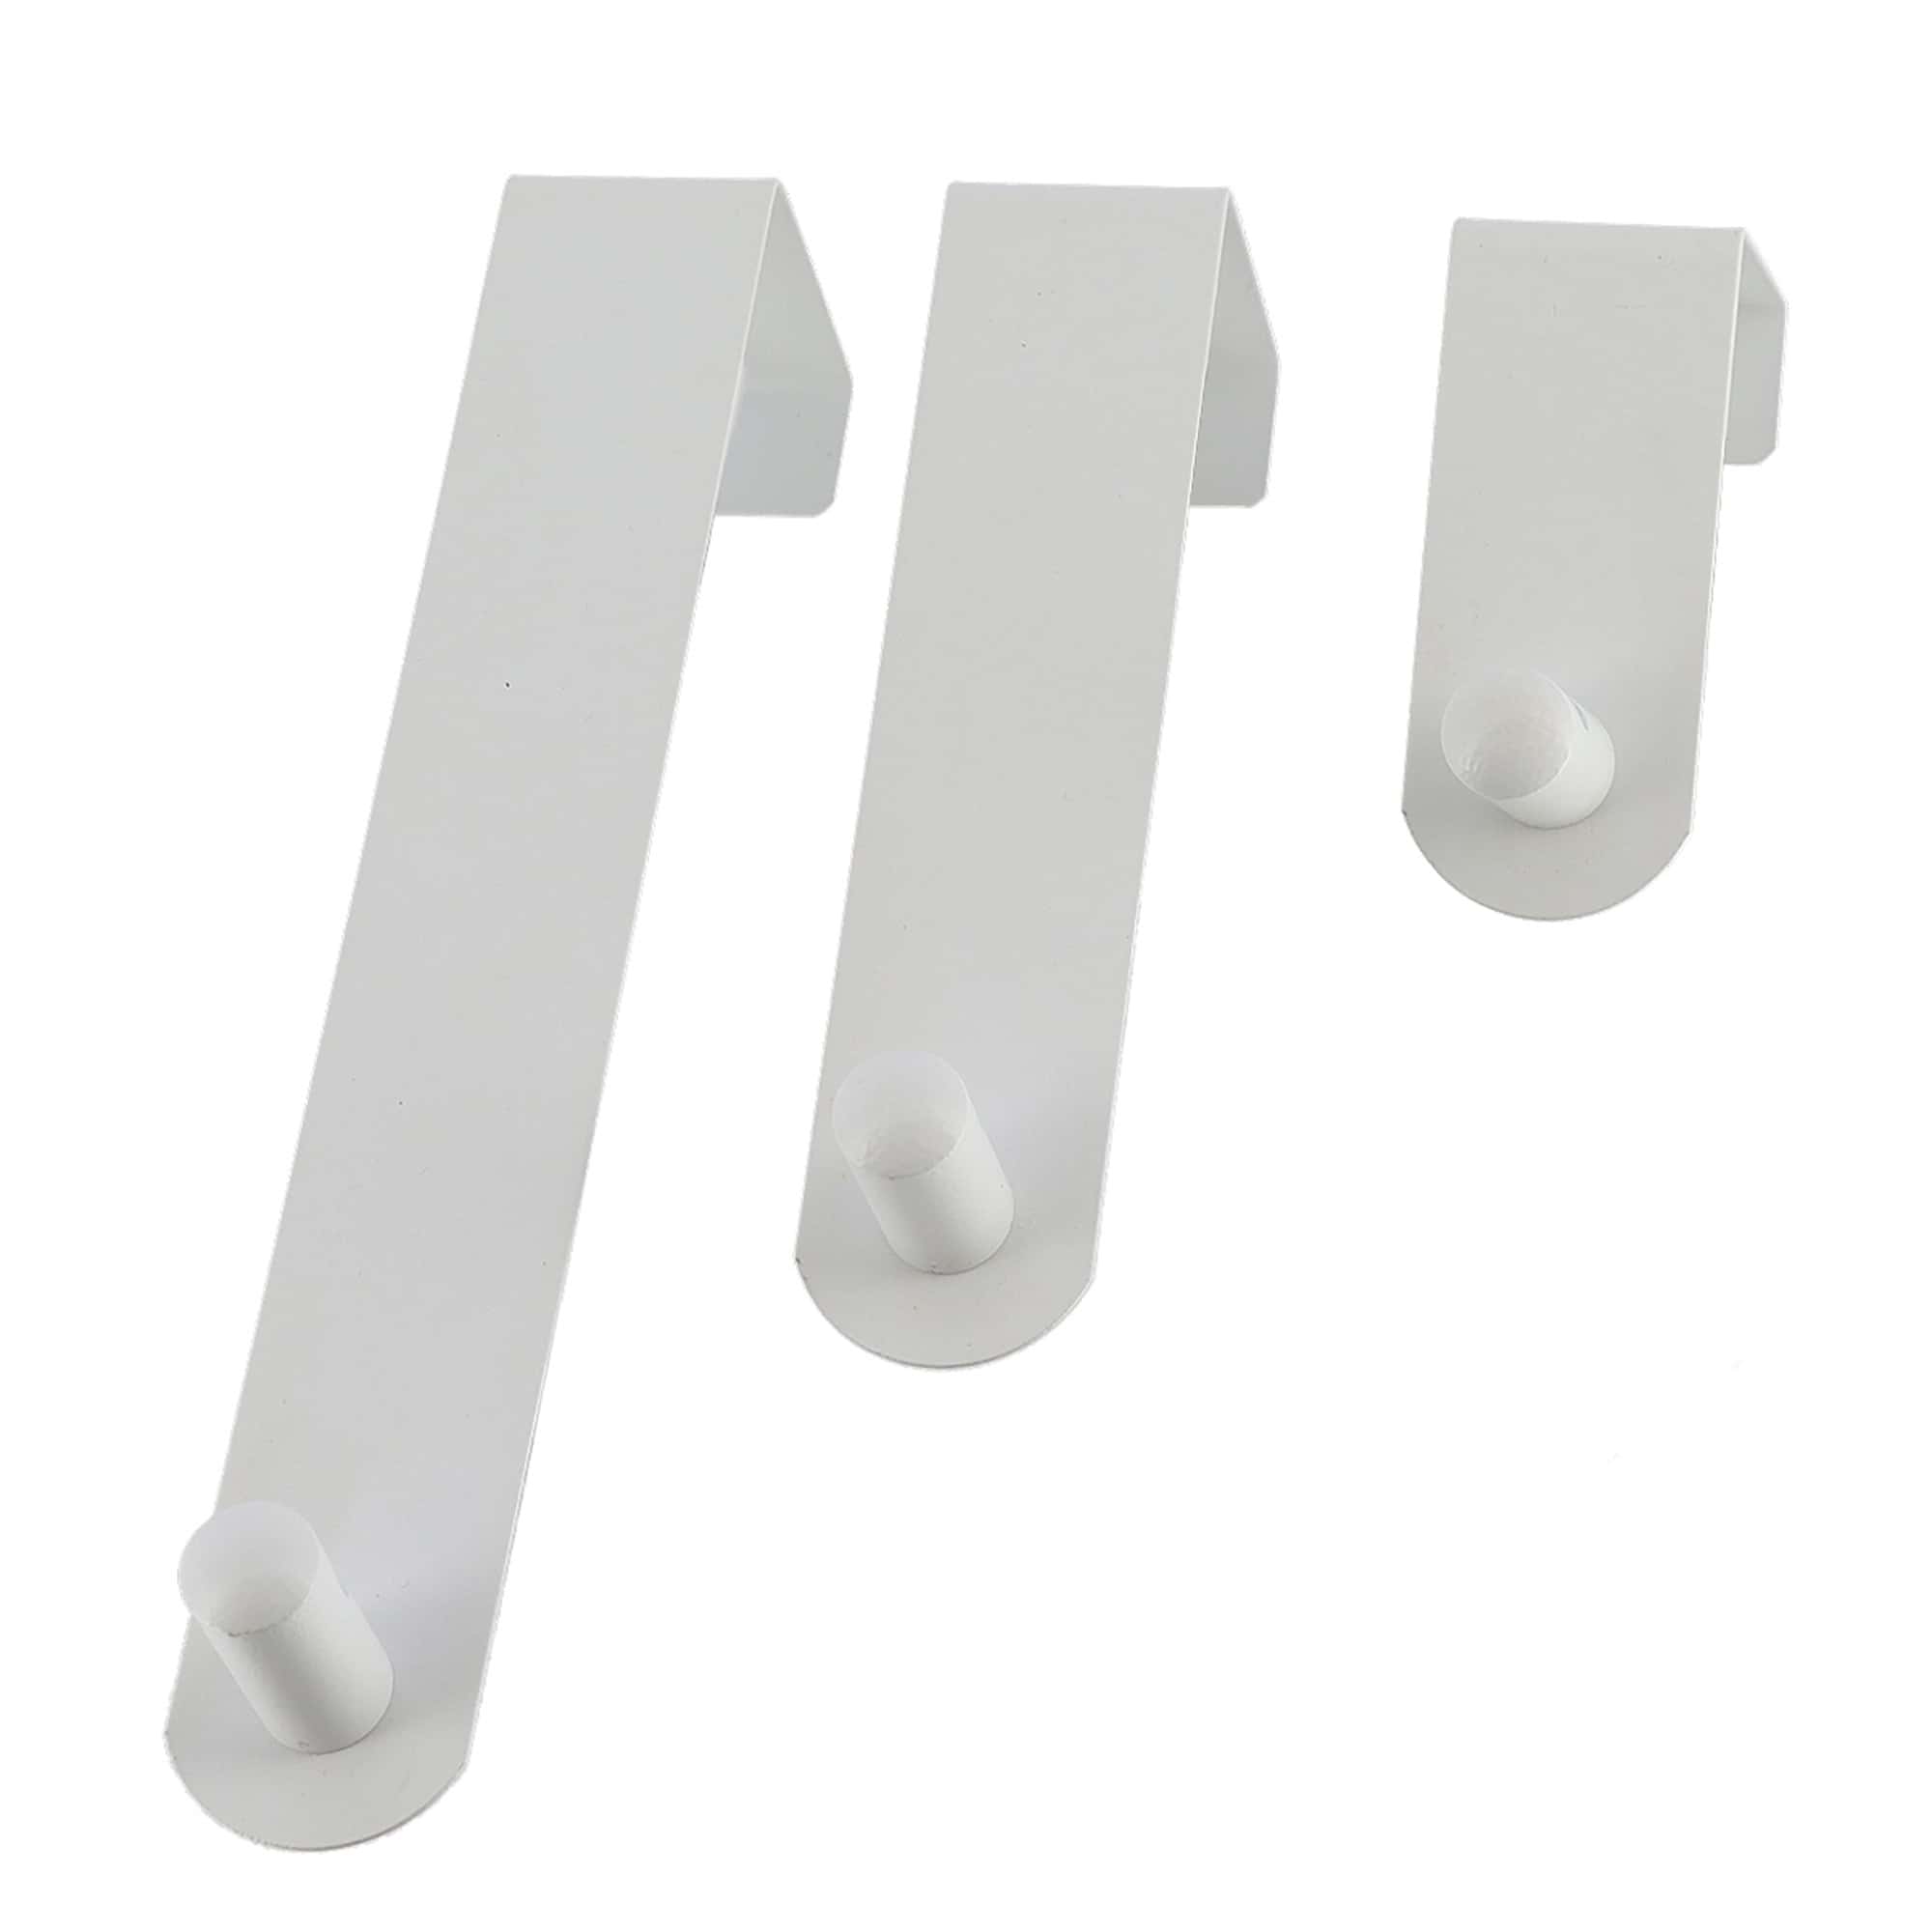 Minimalist White Door Hooks Set: Three Hooks of Different Sizes with a Clean and Sleek Design Isolated on a White Background, Ready for Easy Mounting.